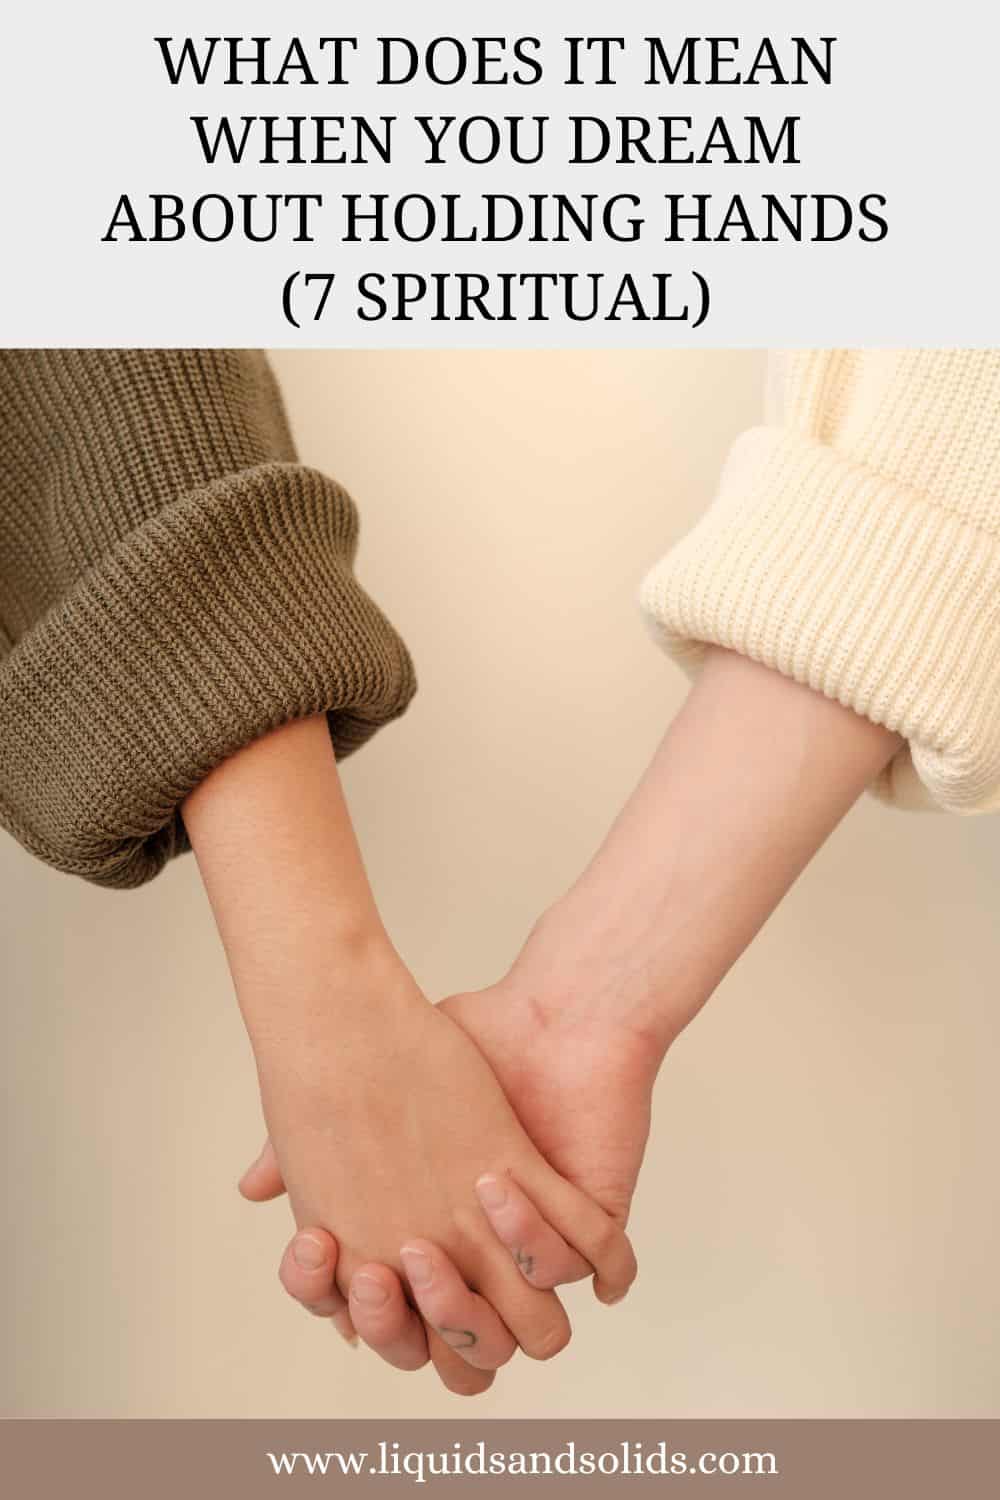 What Does It Mean When You Dream About Holding Hands? (7 Spiritual)